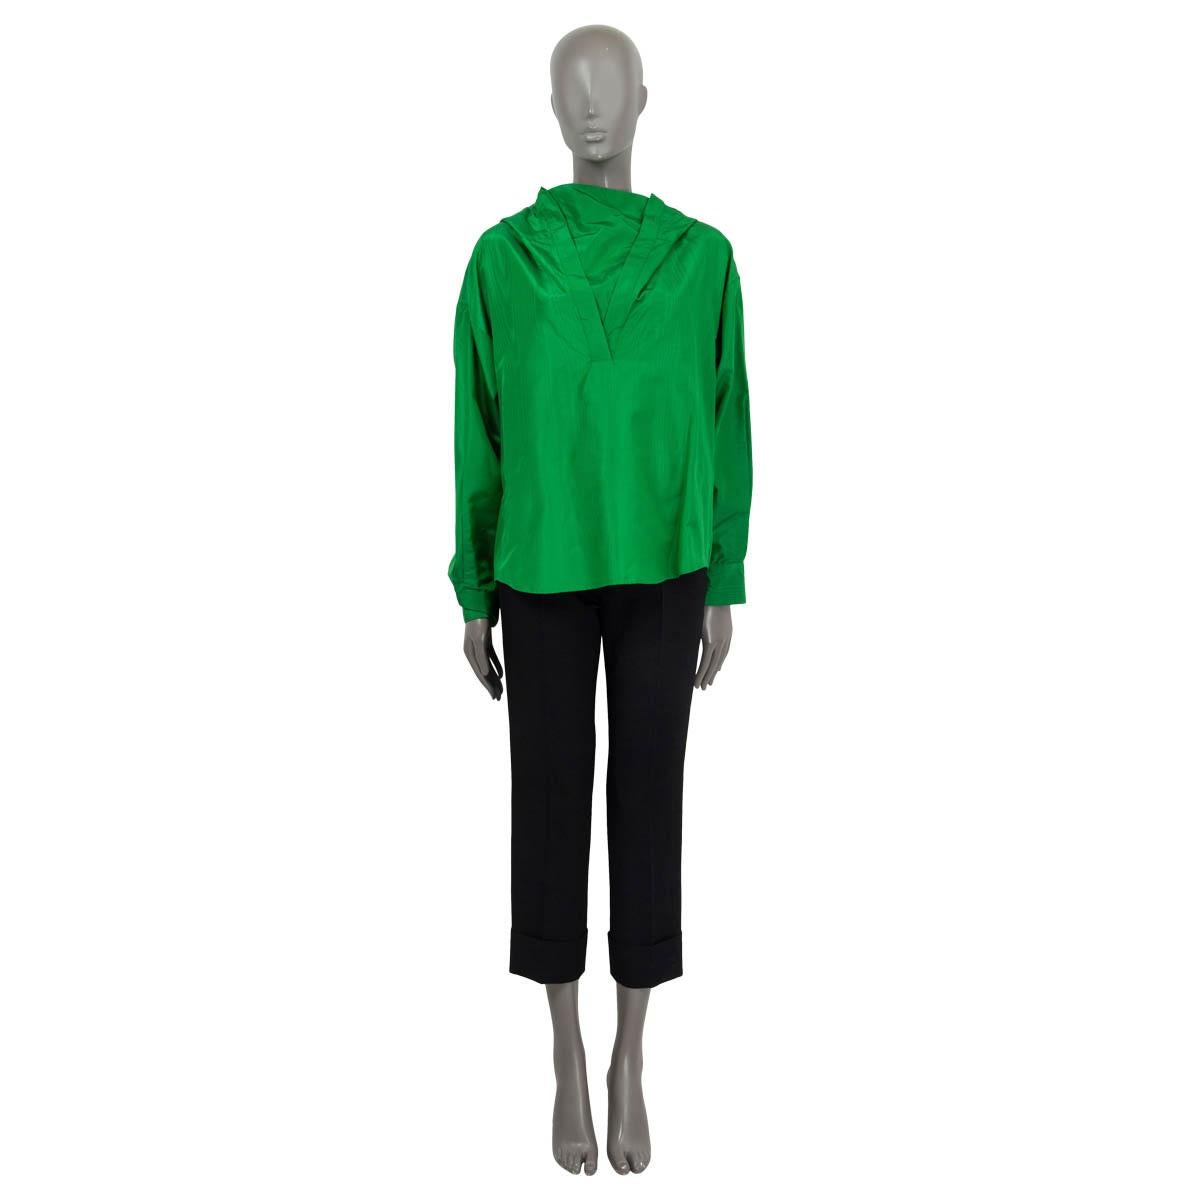 100% authentic Valentino Spring/Summer 2022 oversized hooded anorak blouse in green silk (100%). Features long sleeves and buttoned cuffs. Unlined. Has been worn once or twice and is in virtually new condition.

Measurements
Tag